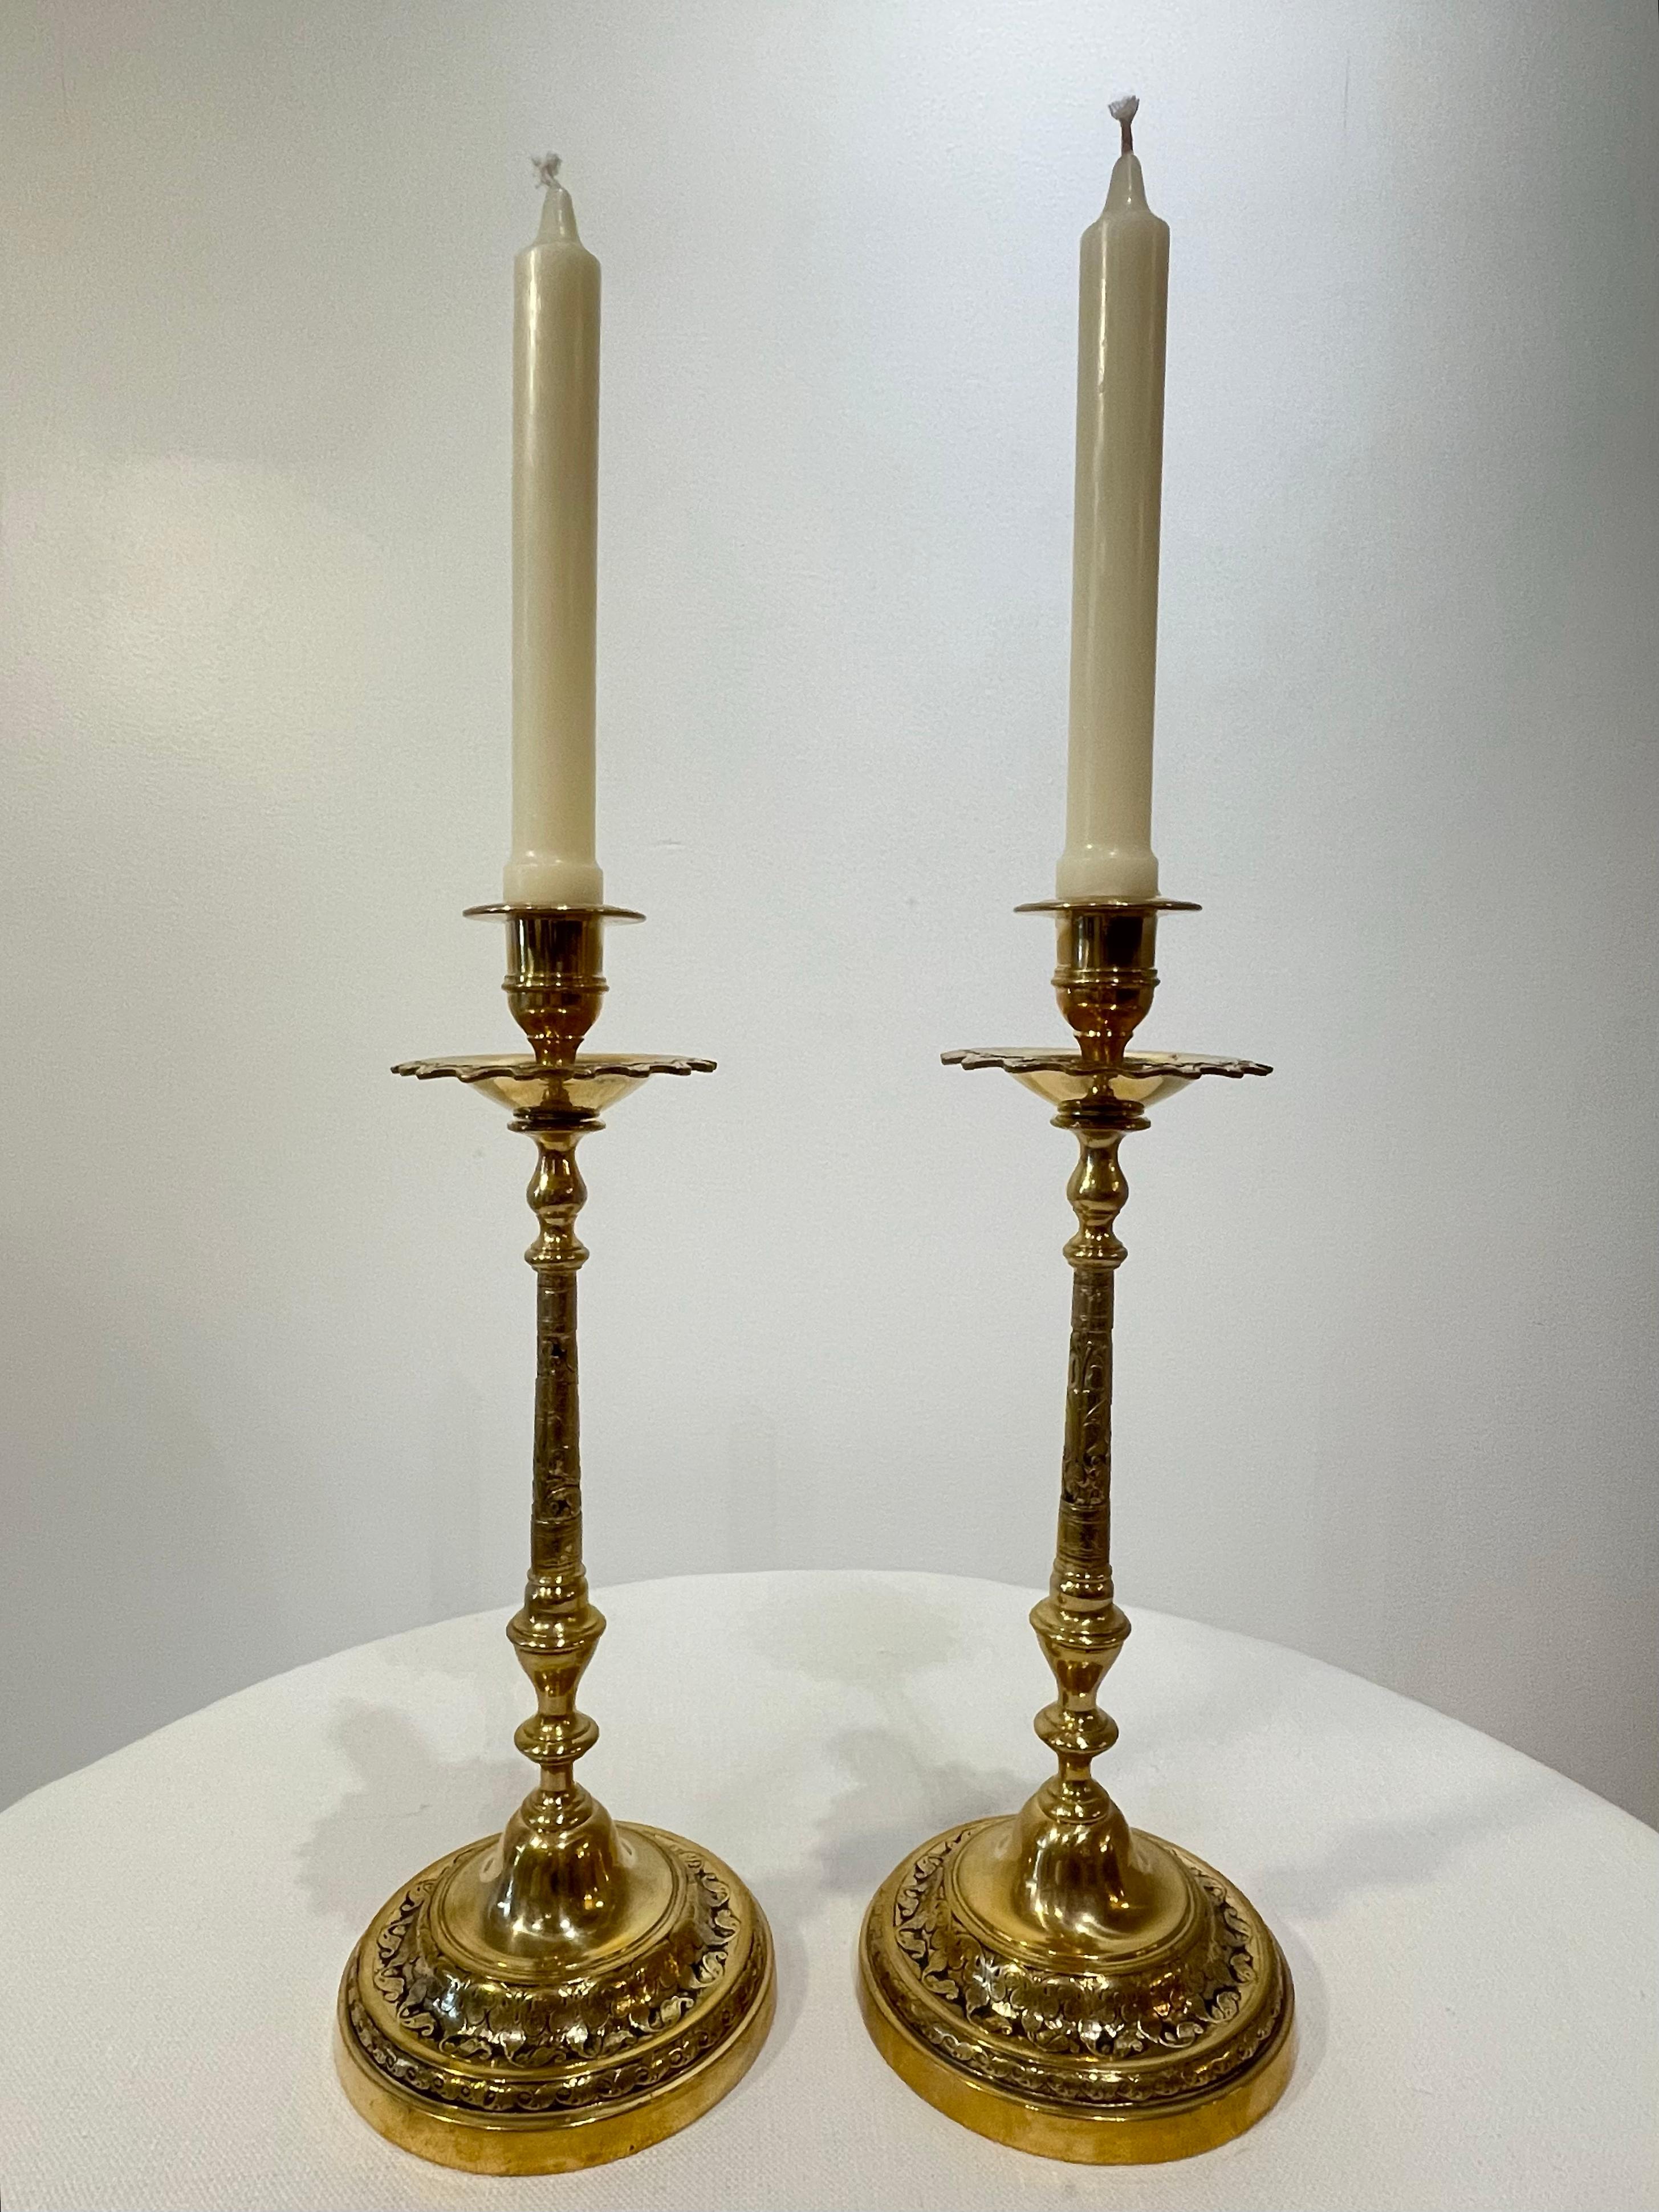 Late 19th century pair of brass candlesticks with exotic style detail. In the Ottoman tastes made popular during the 1880s, these tall candlesticks are both glamorous in proportion and strong in their design. 